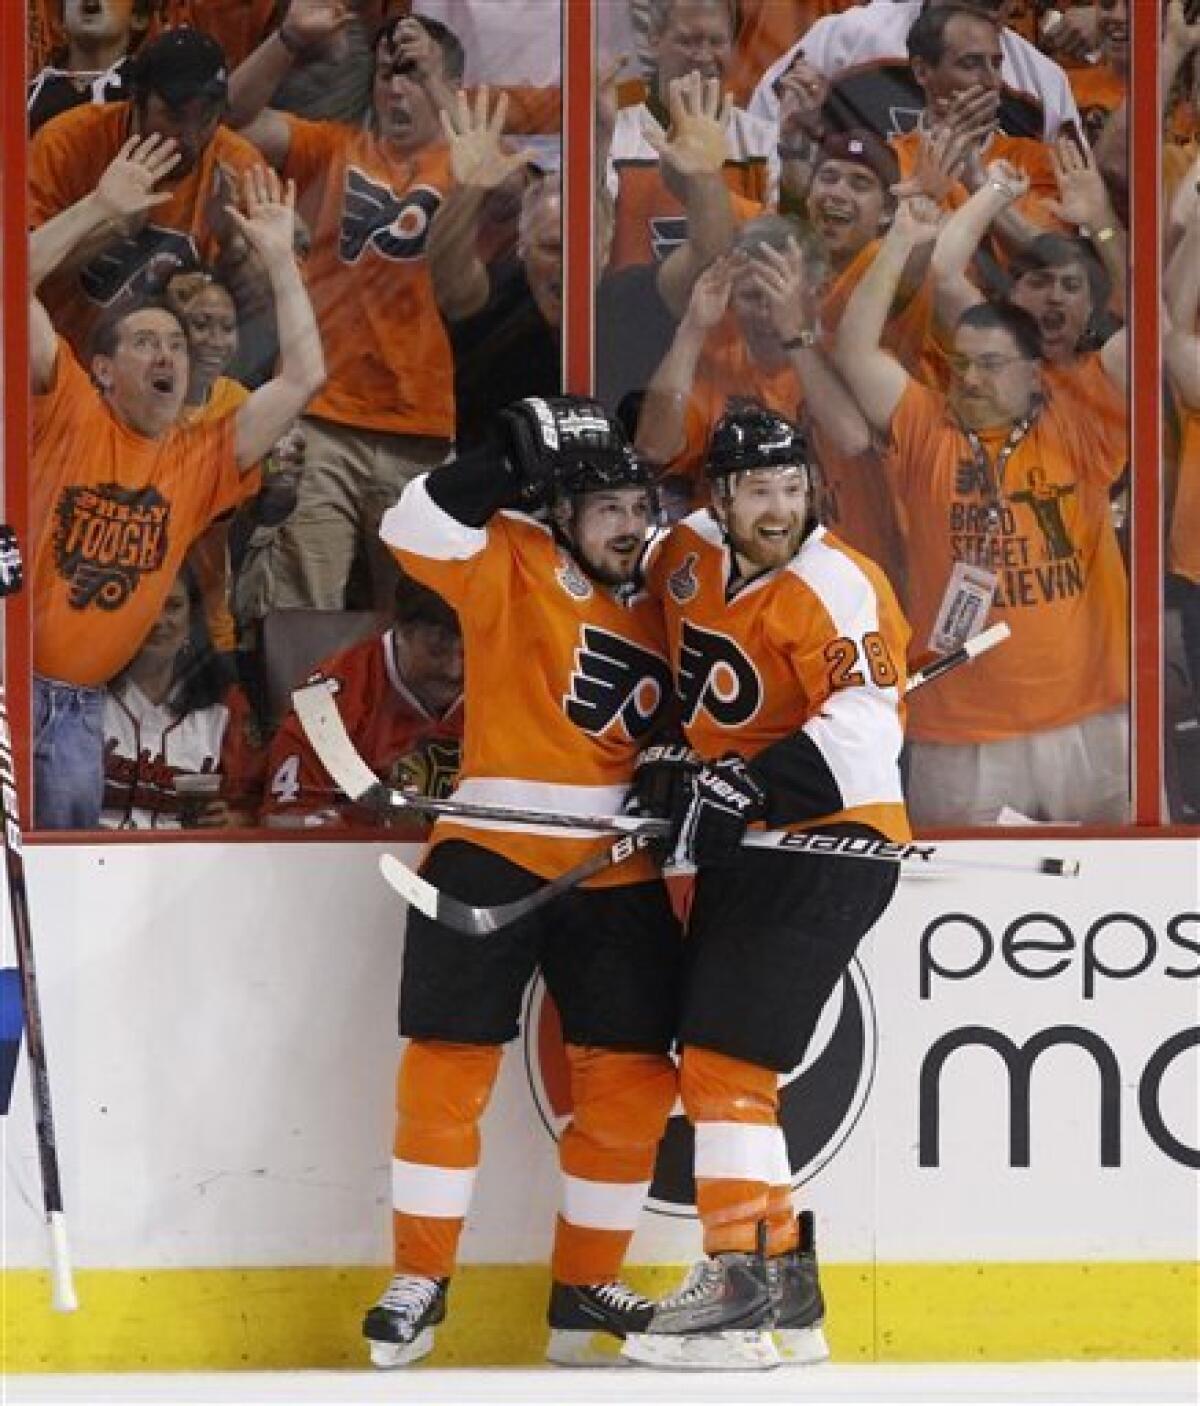 Daniel Briere: From Playoff Hero to Flyers General Manager